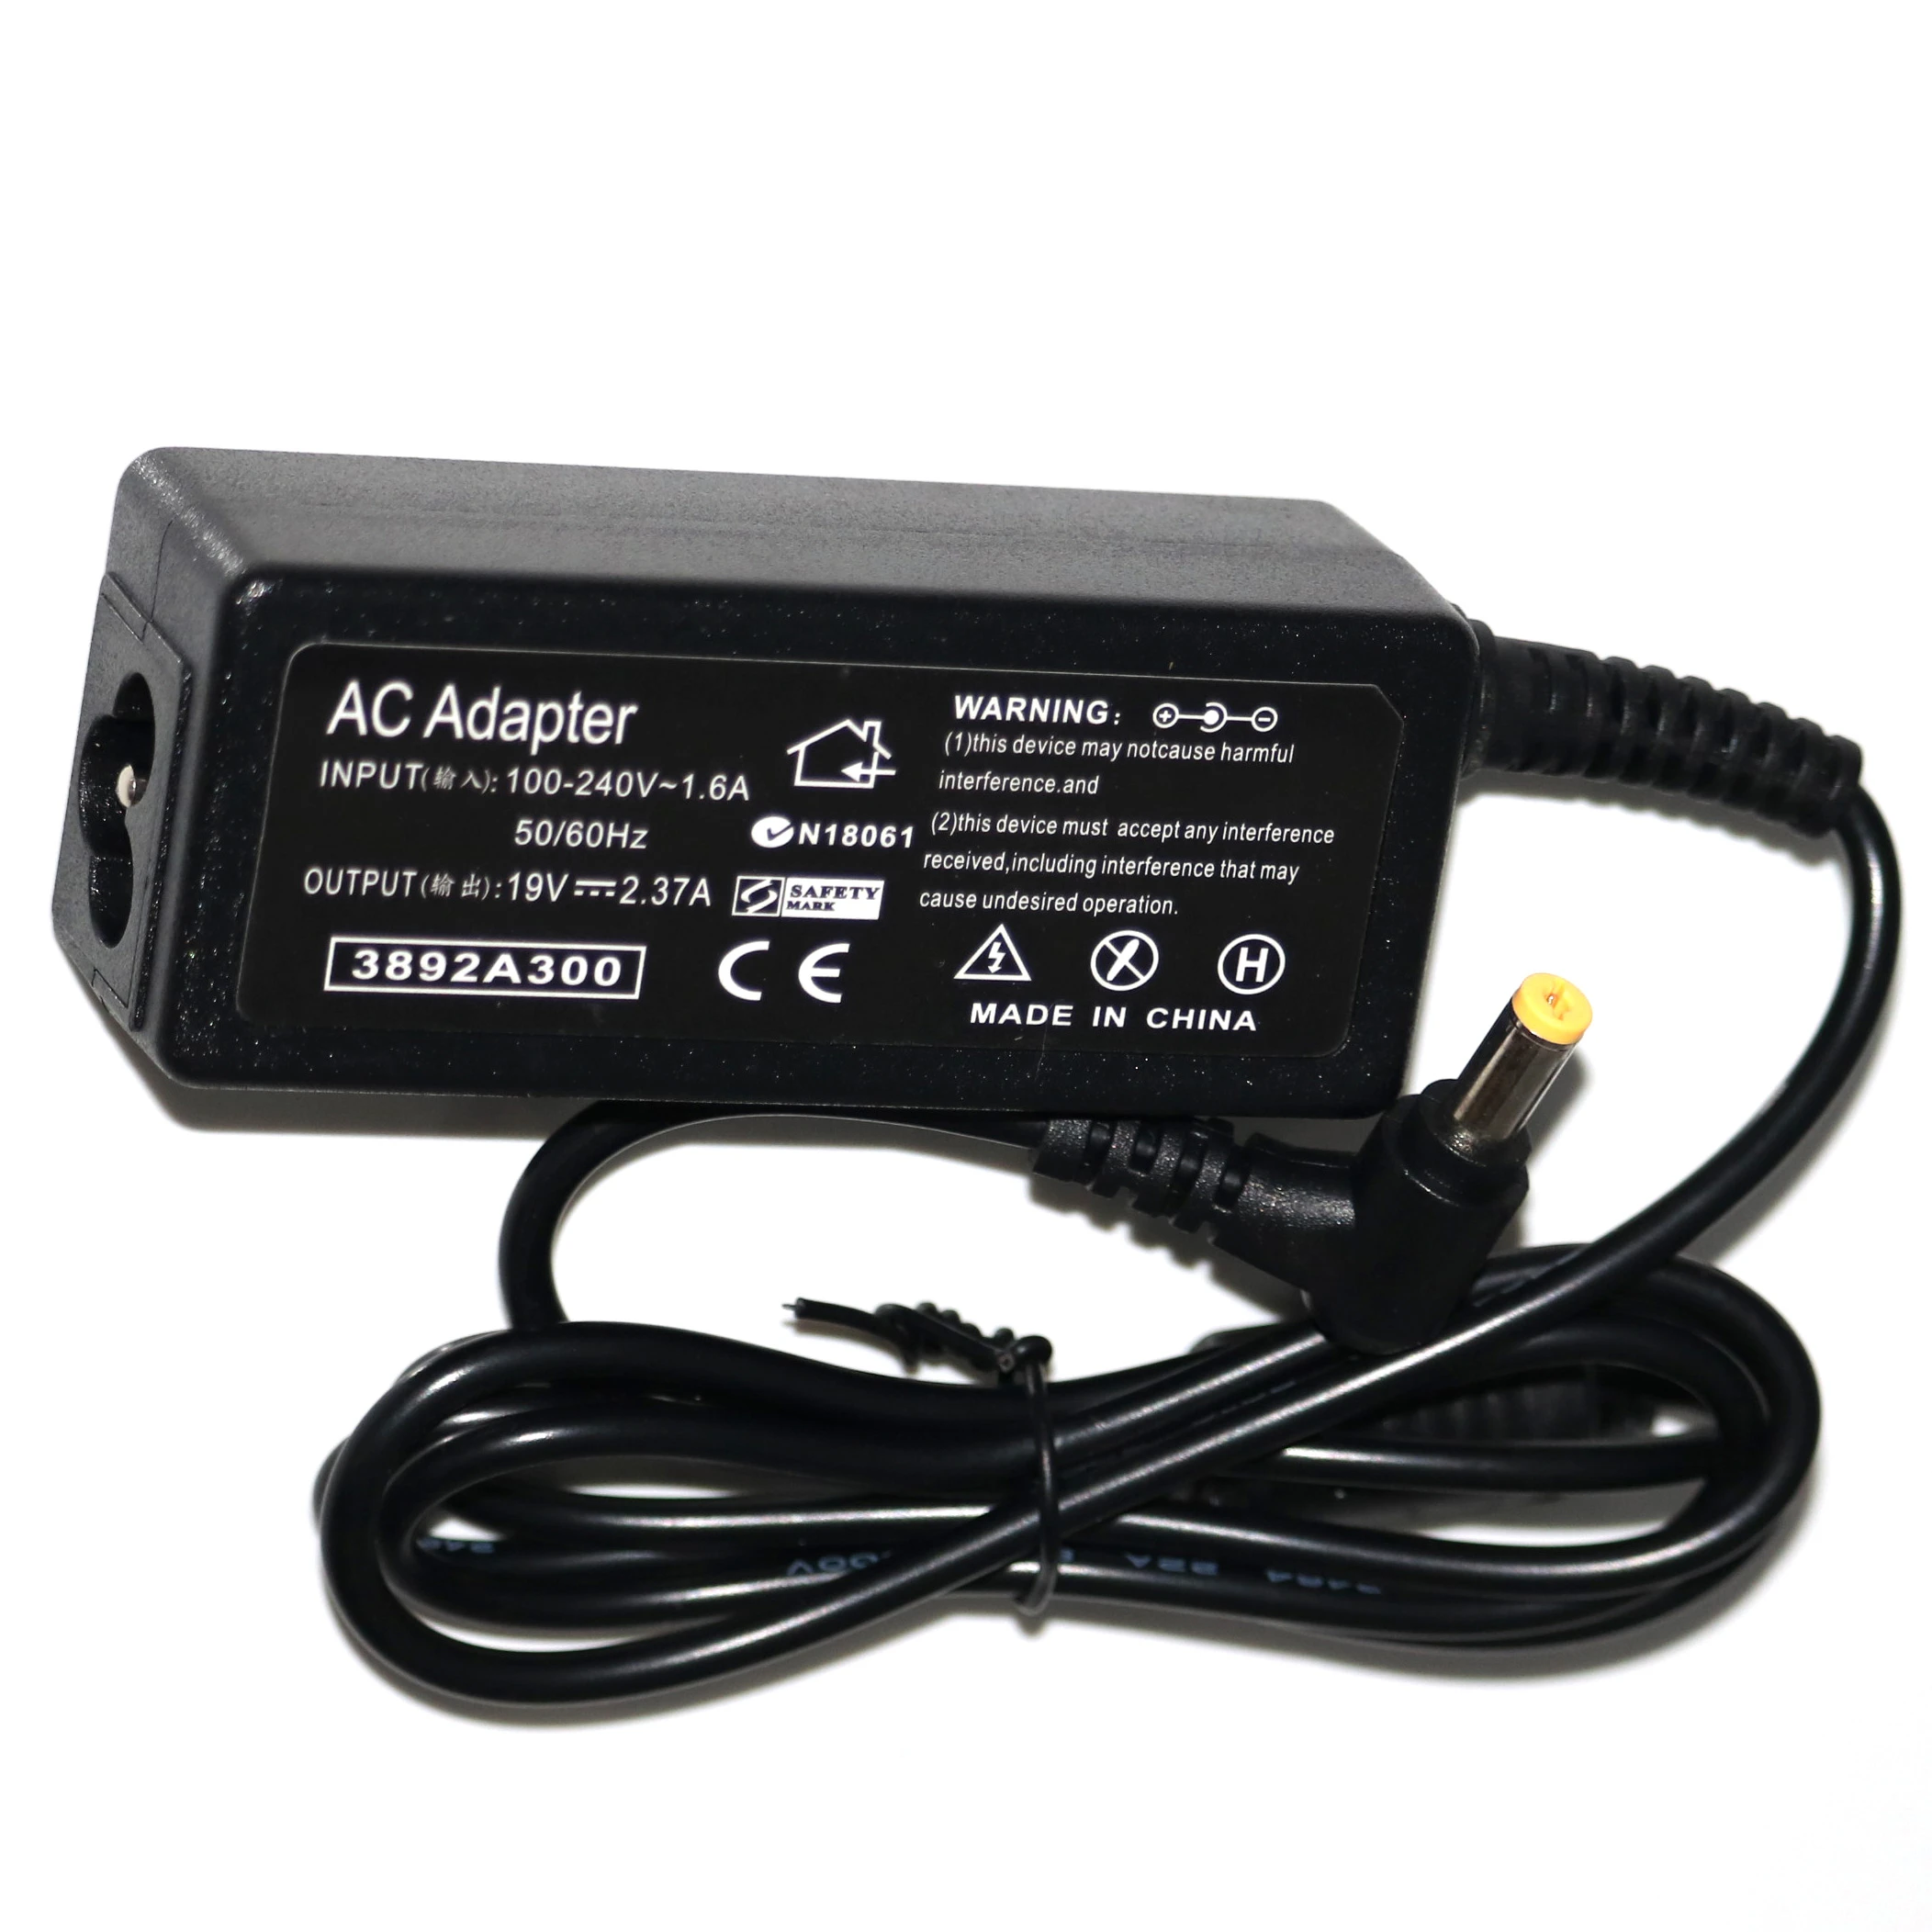 laptop bags AC Power adapter 19V 2.37A 45W laptop charger for Acer Aspire E5-553 E5-553G E5-573 E5-574 E5-575 E5-575T E5-575TG E5-711 E5-721 backpack with laptop sleeve